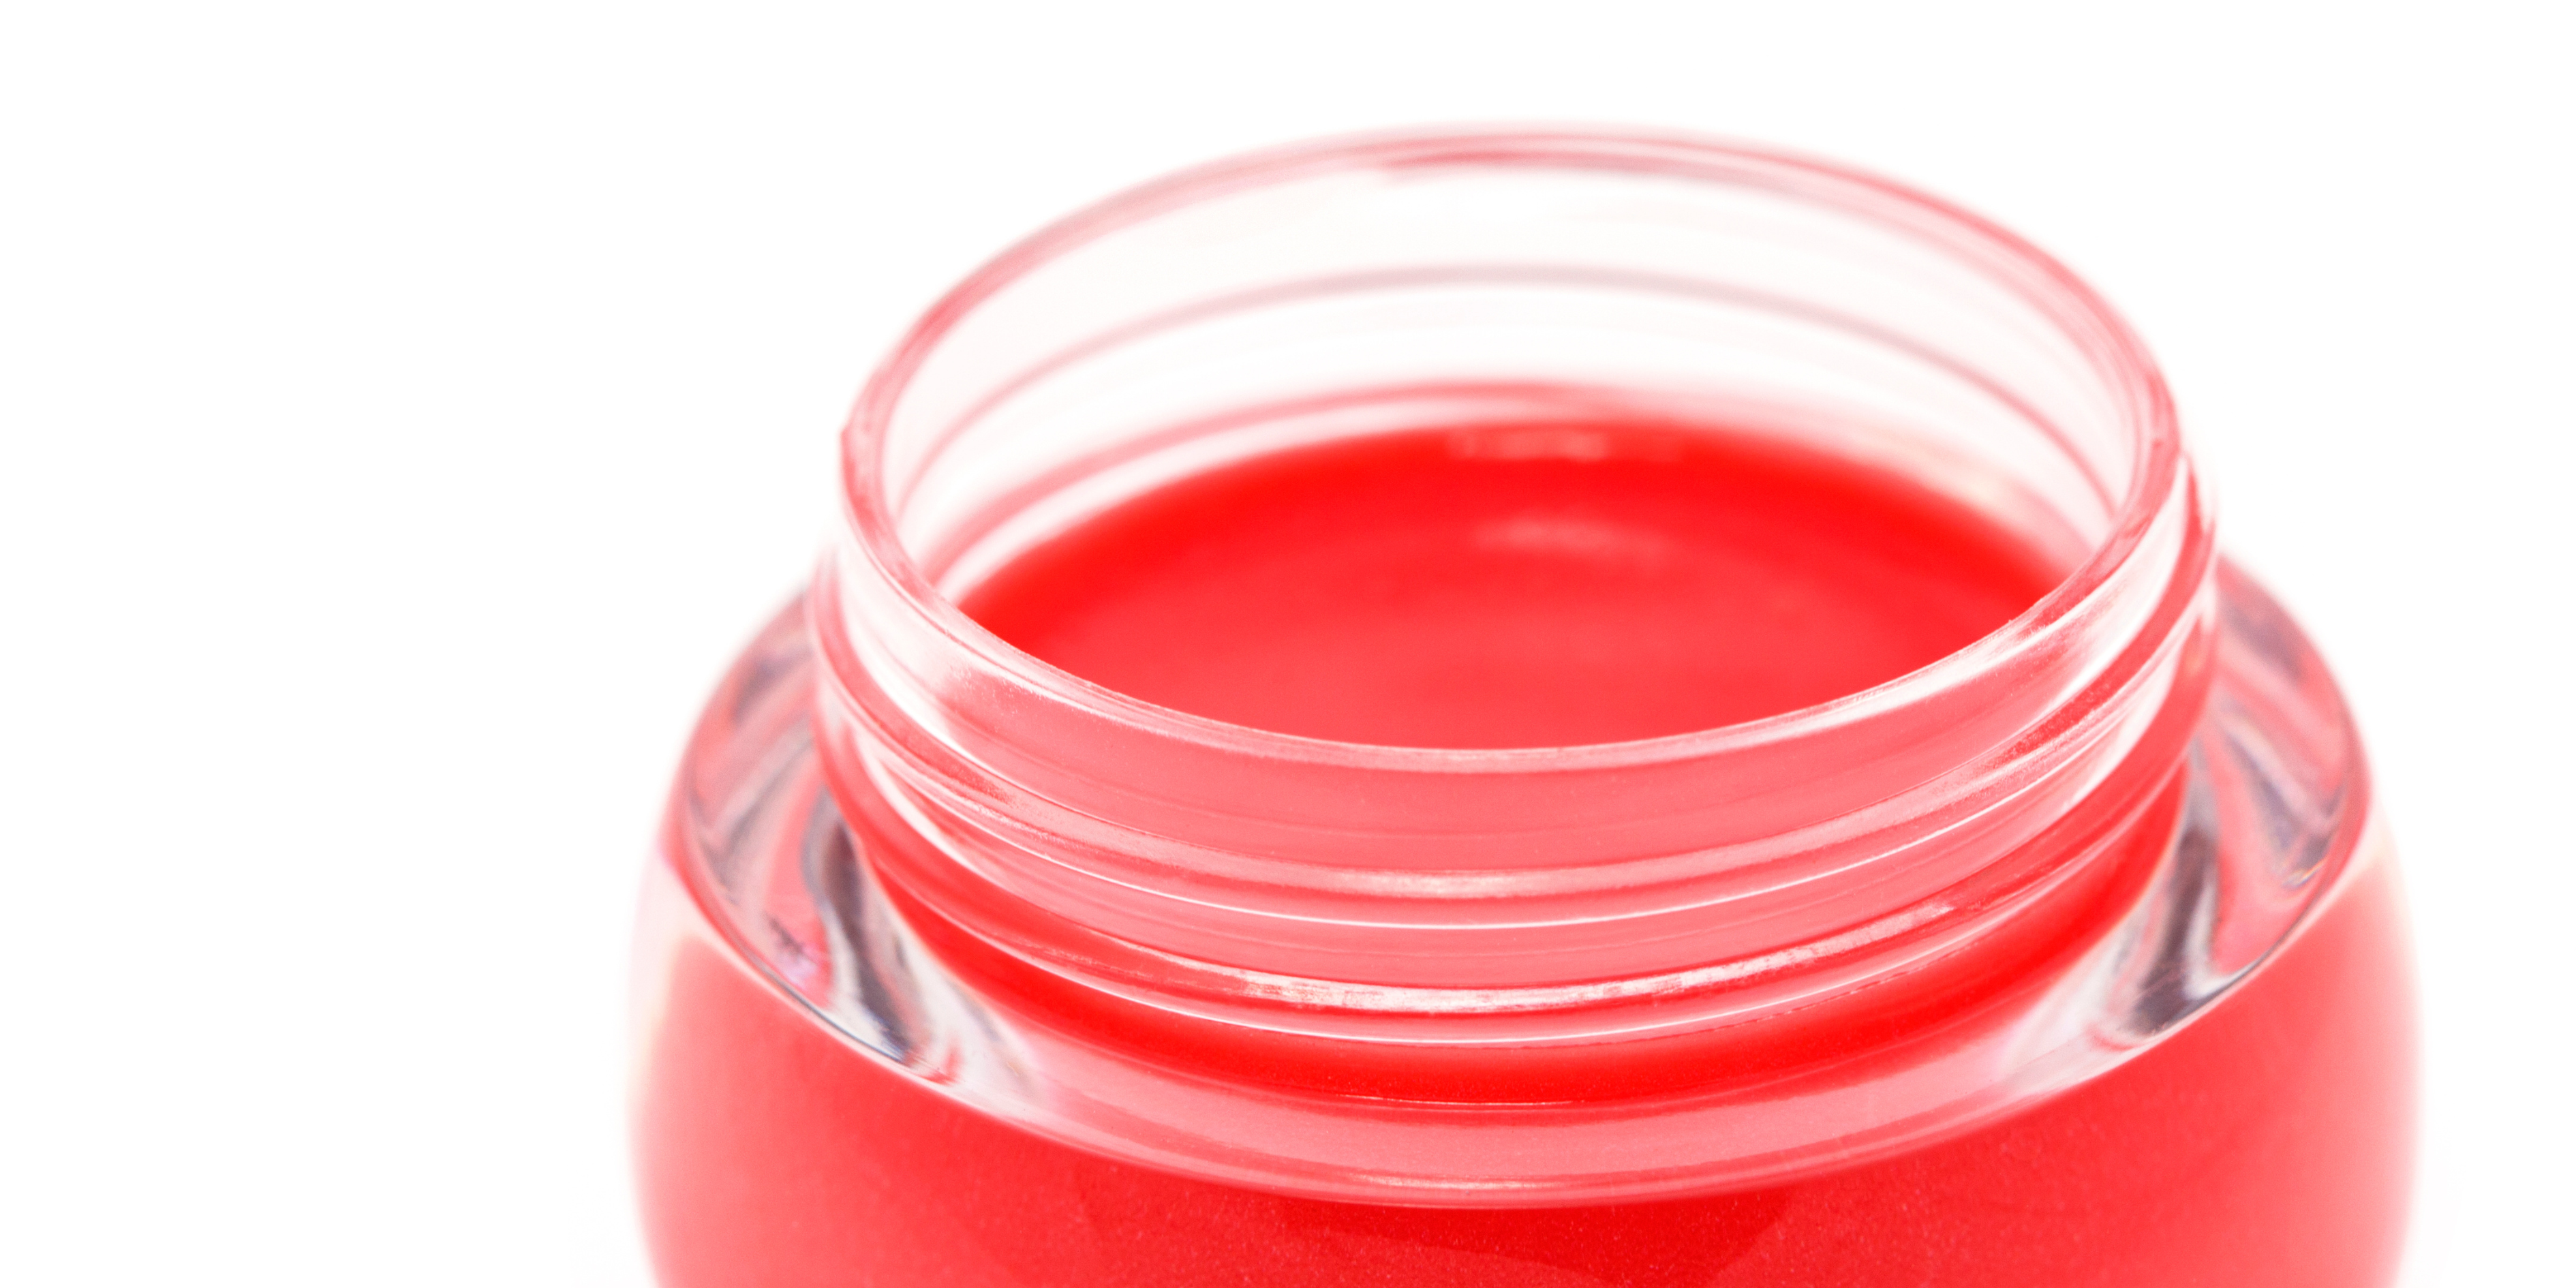 Flashback to your favourite lip balm of the 90’s: does it influence your candle choice today?